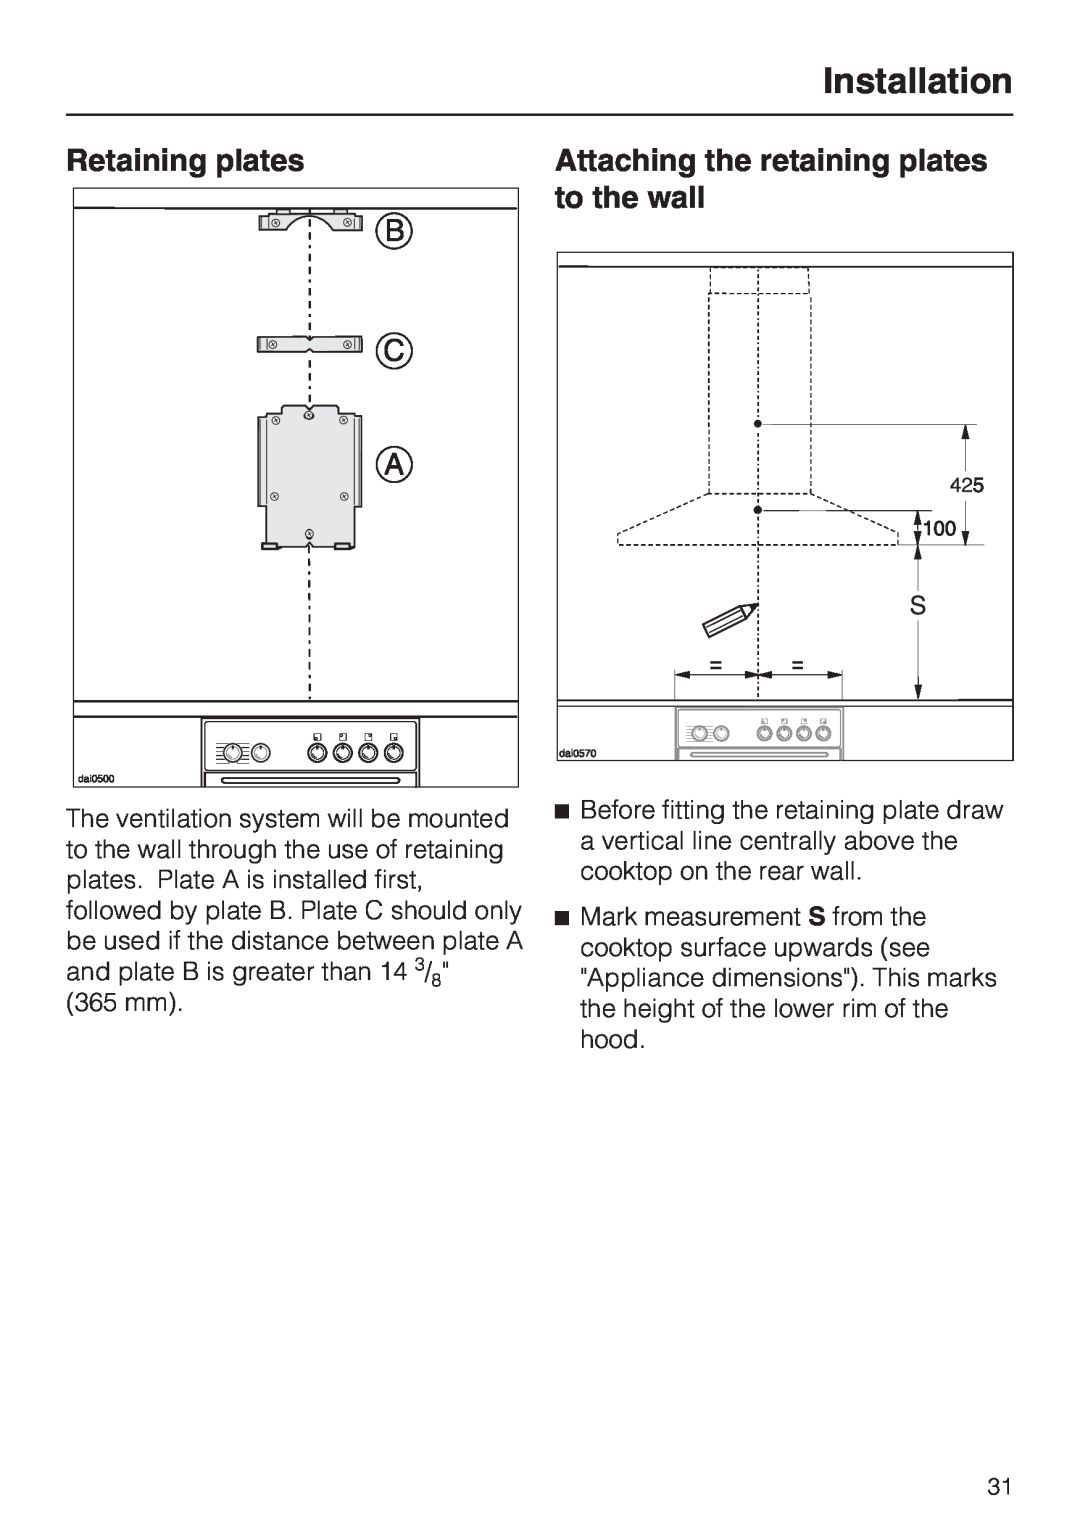 Miele DA211, DA218 installation instructions Retaining plates, Attaching the retaining plates, to the wall, Installation 